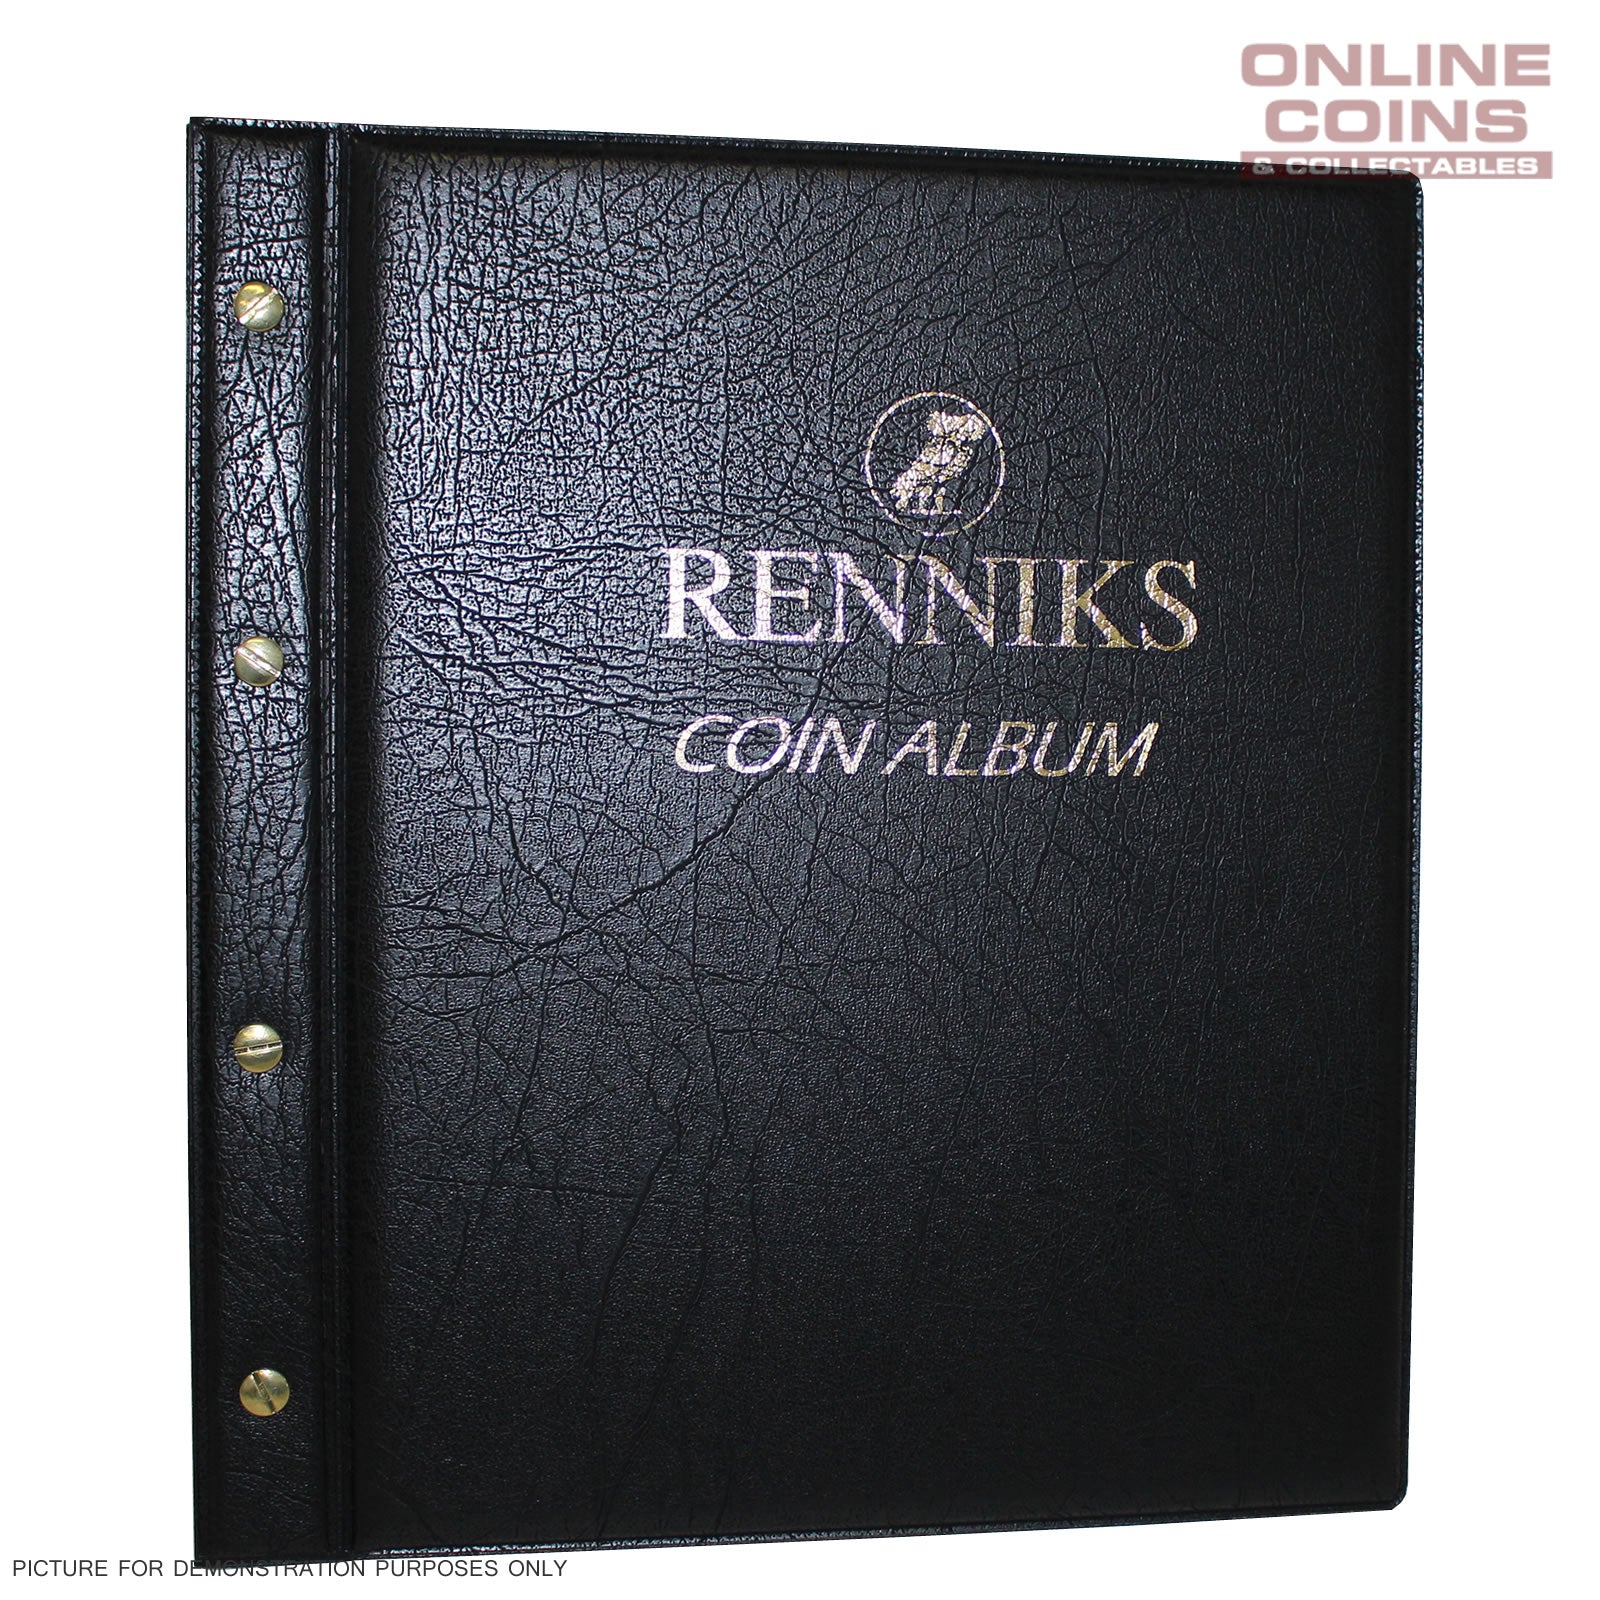 Renniks Coin Album Padded leatherette Cover Including 6 Coin Album Pages - BLACK